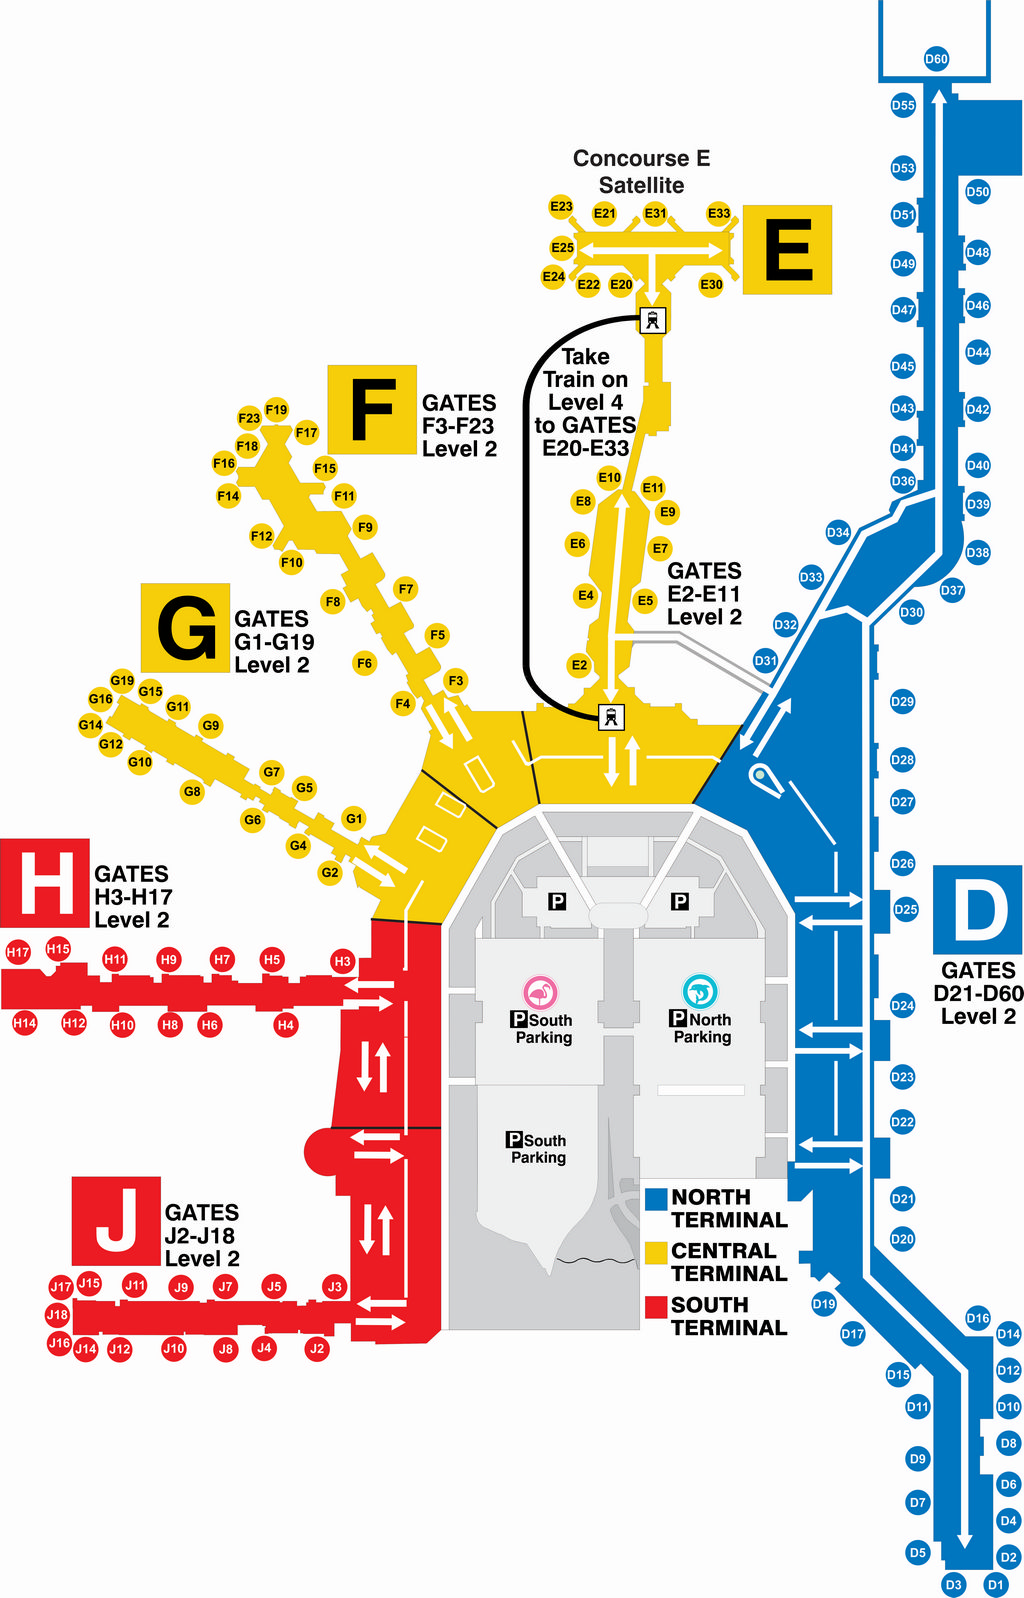 Miami International Airport Terminal Guide showing gates and concourses